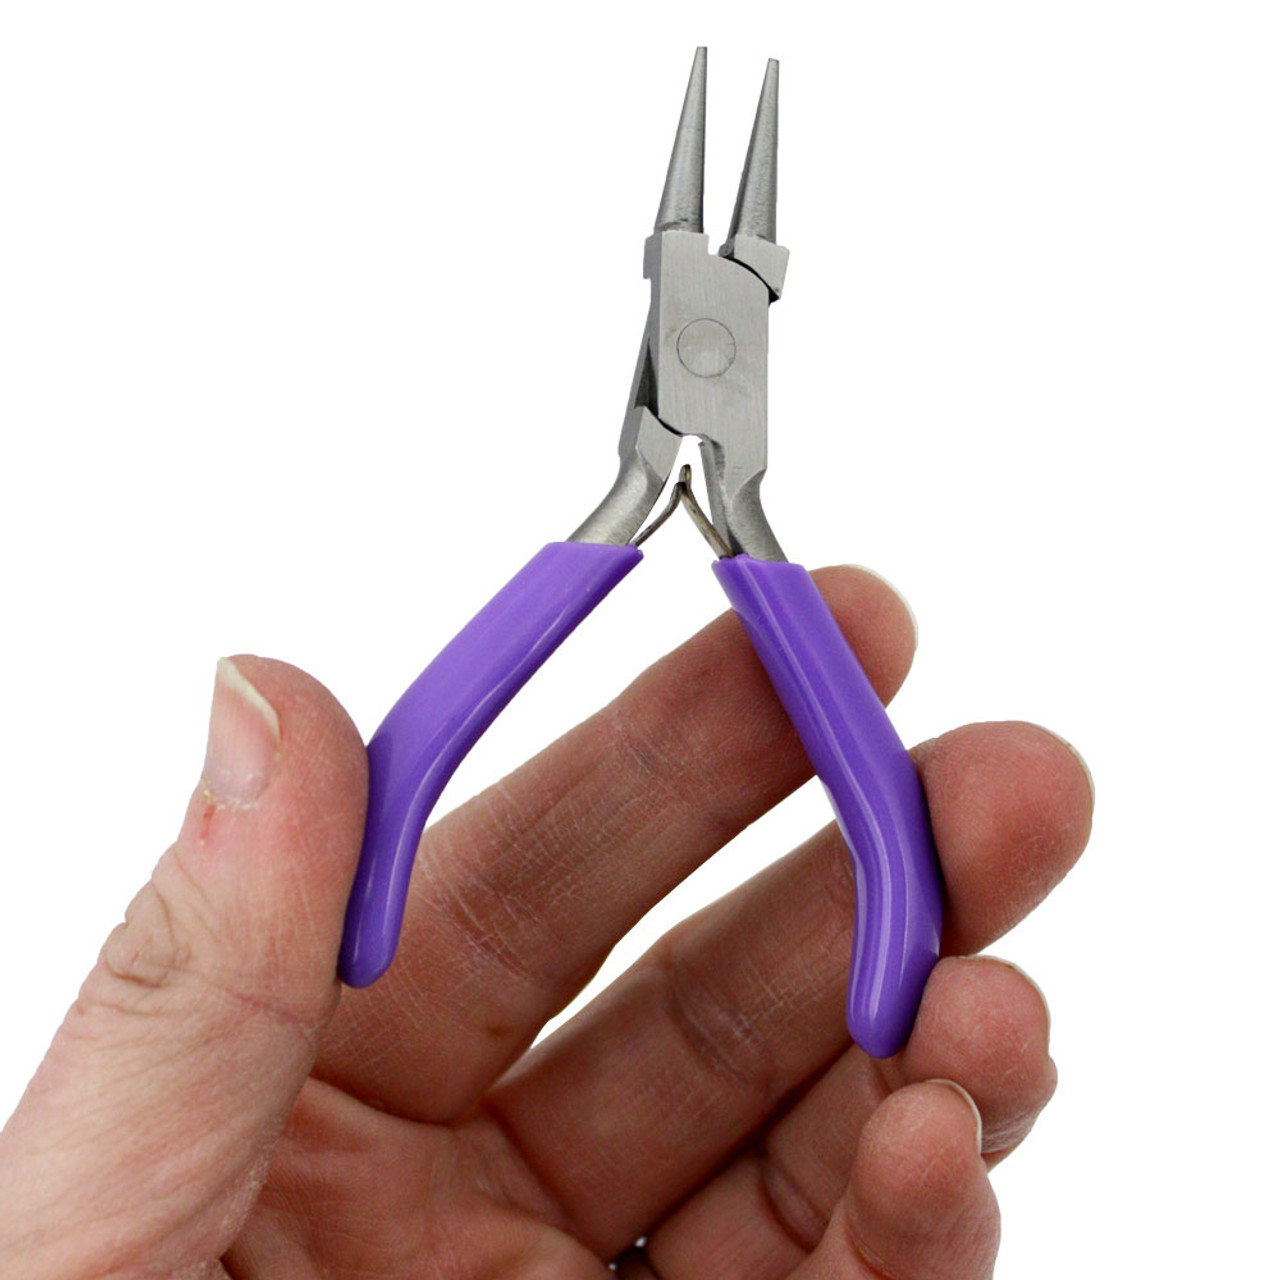 8PC/Set Jewelry Making Tools Round Nose Pliers Wire Cutter Scissor